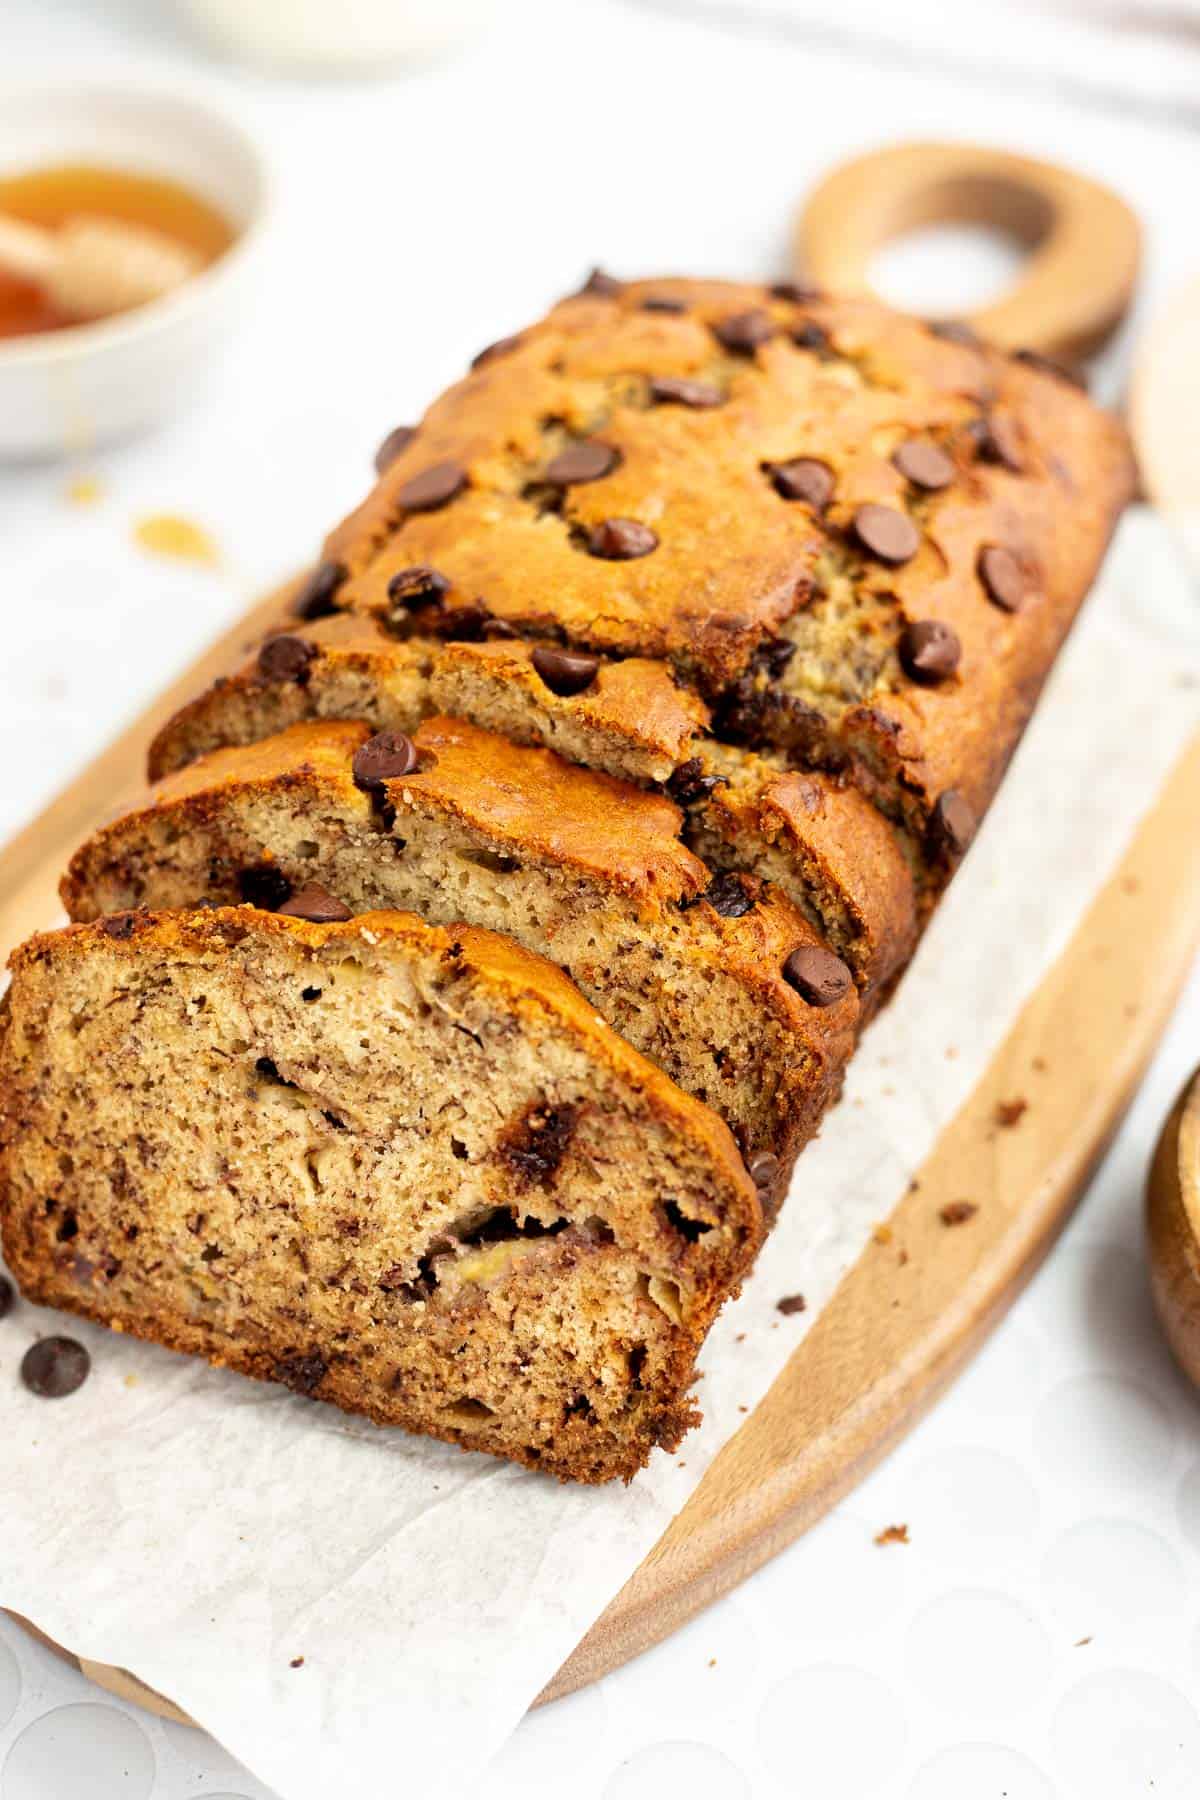 slices of dairy free banana bread with chocolate chips on parchment paper.